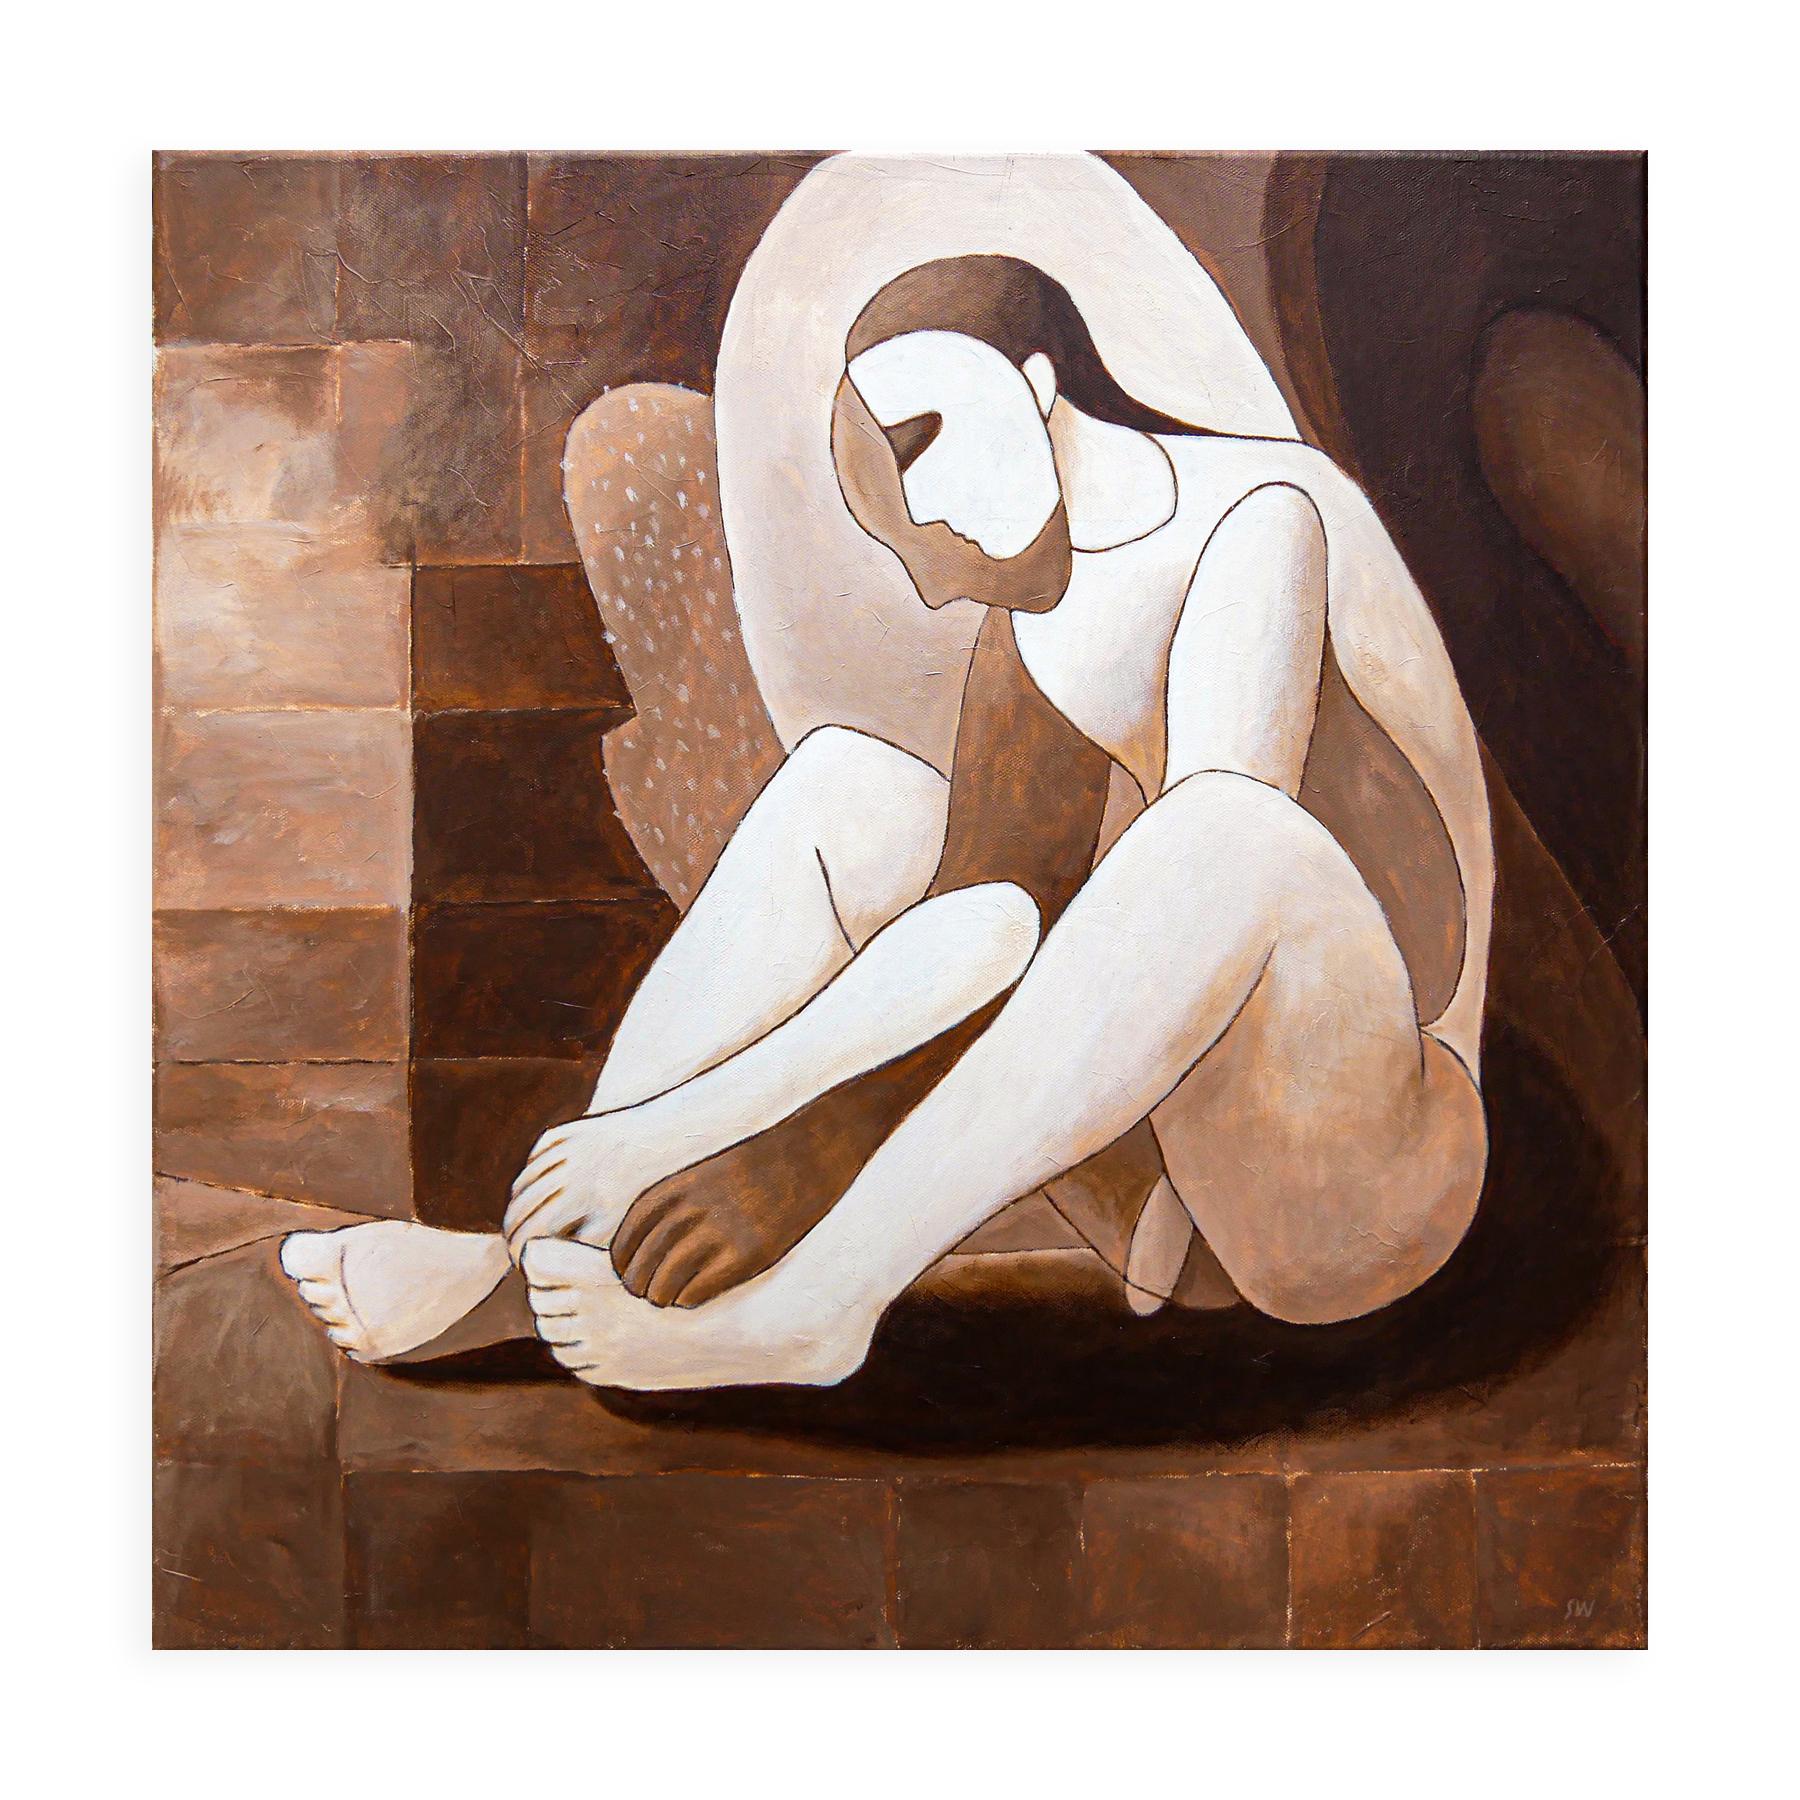 Brown / sepia-toned abstract figurative painting by Houston, TX artist Scott Woodard. The painting depicts several figures sitting on the floor in different poses. The figure sits against what seems to be a tiled interior space. Signed by the artist